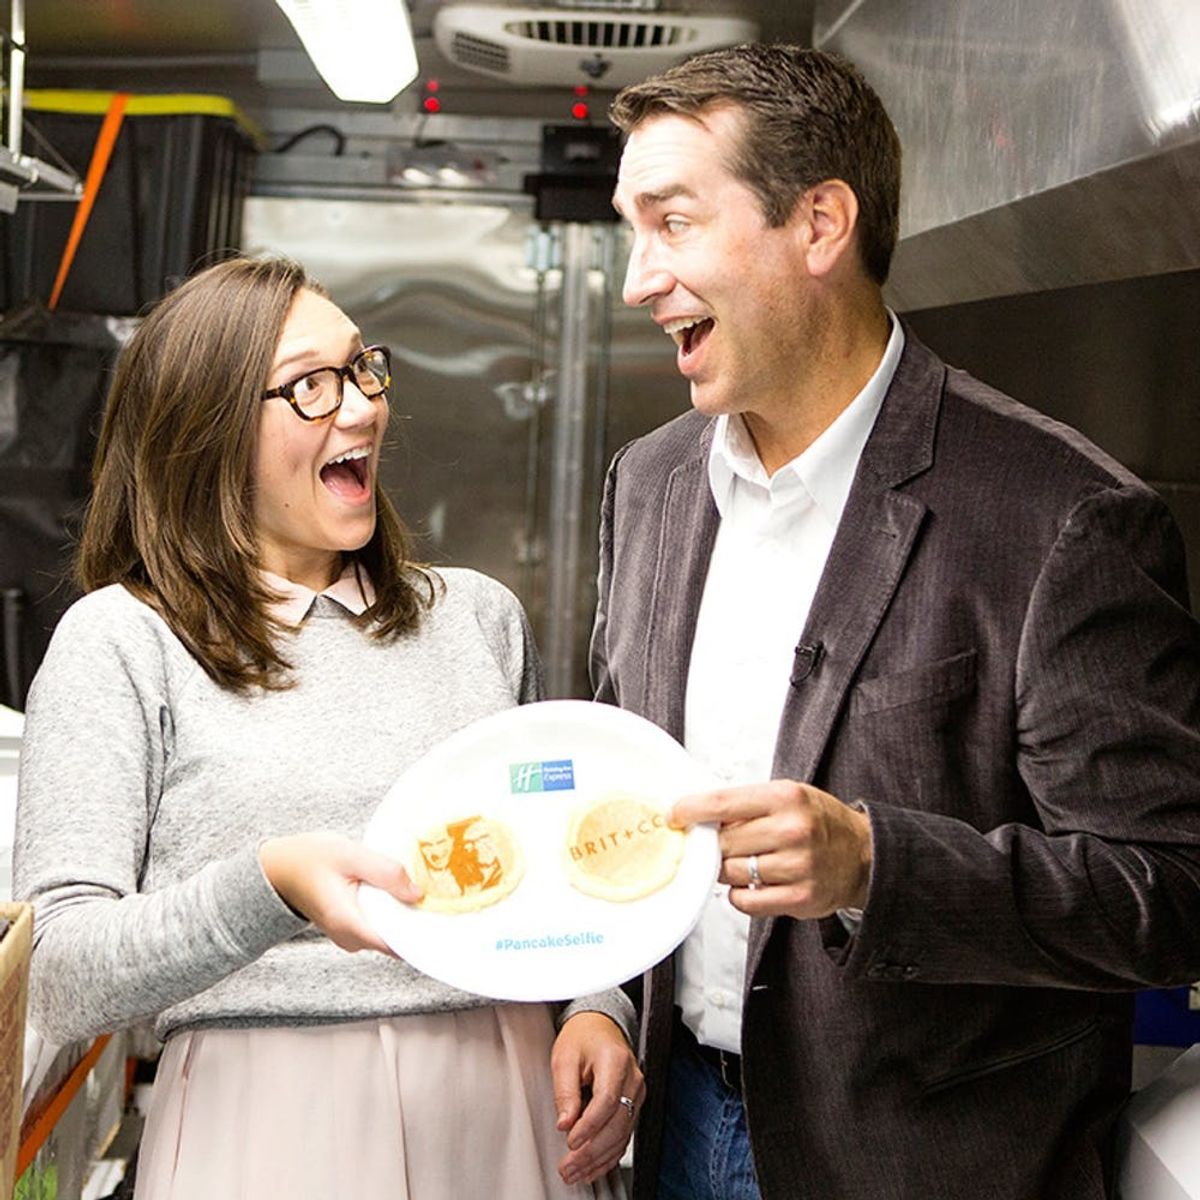 What Happened When I Met Rob Riggle and We Ate Selfie Pancakes Together